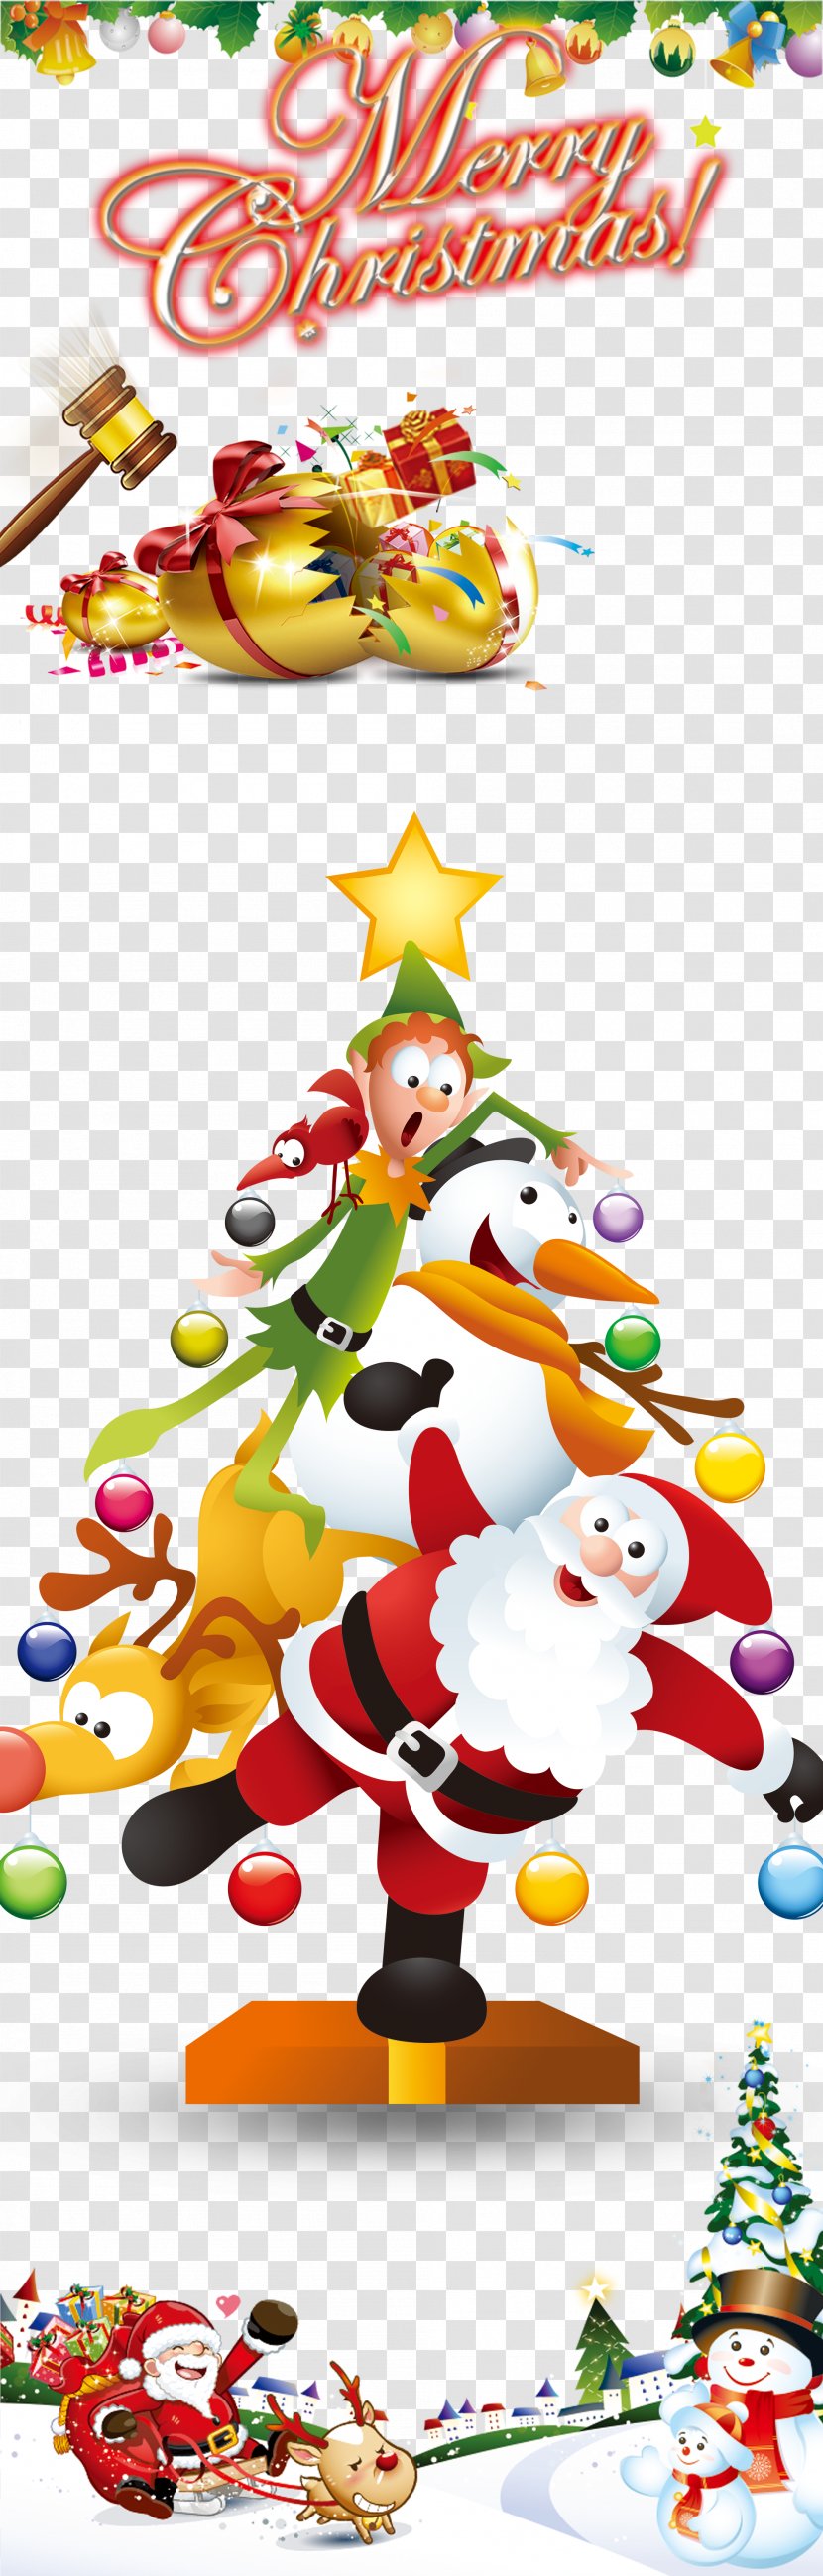 Christmas Holiday Clip Art - Greetings - Creative Transparent PNG